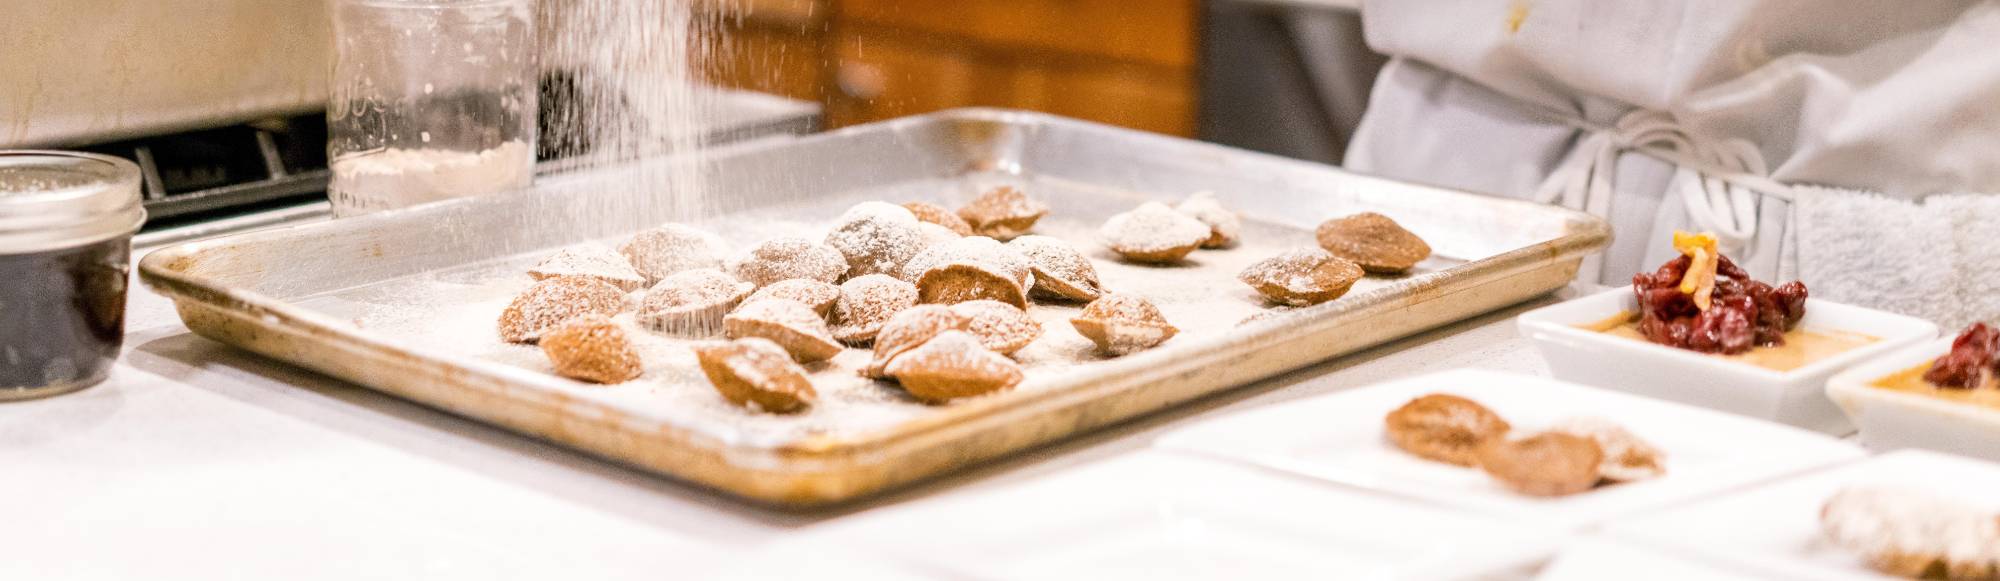 pastries being dusted with powdered sugar